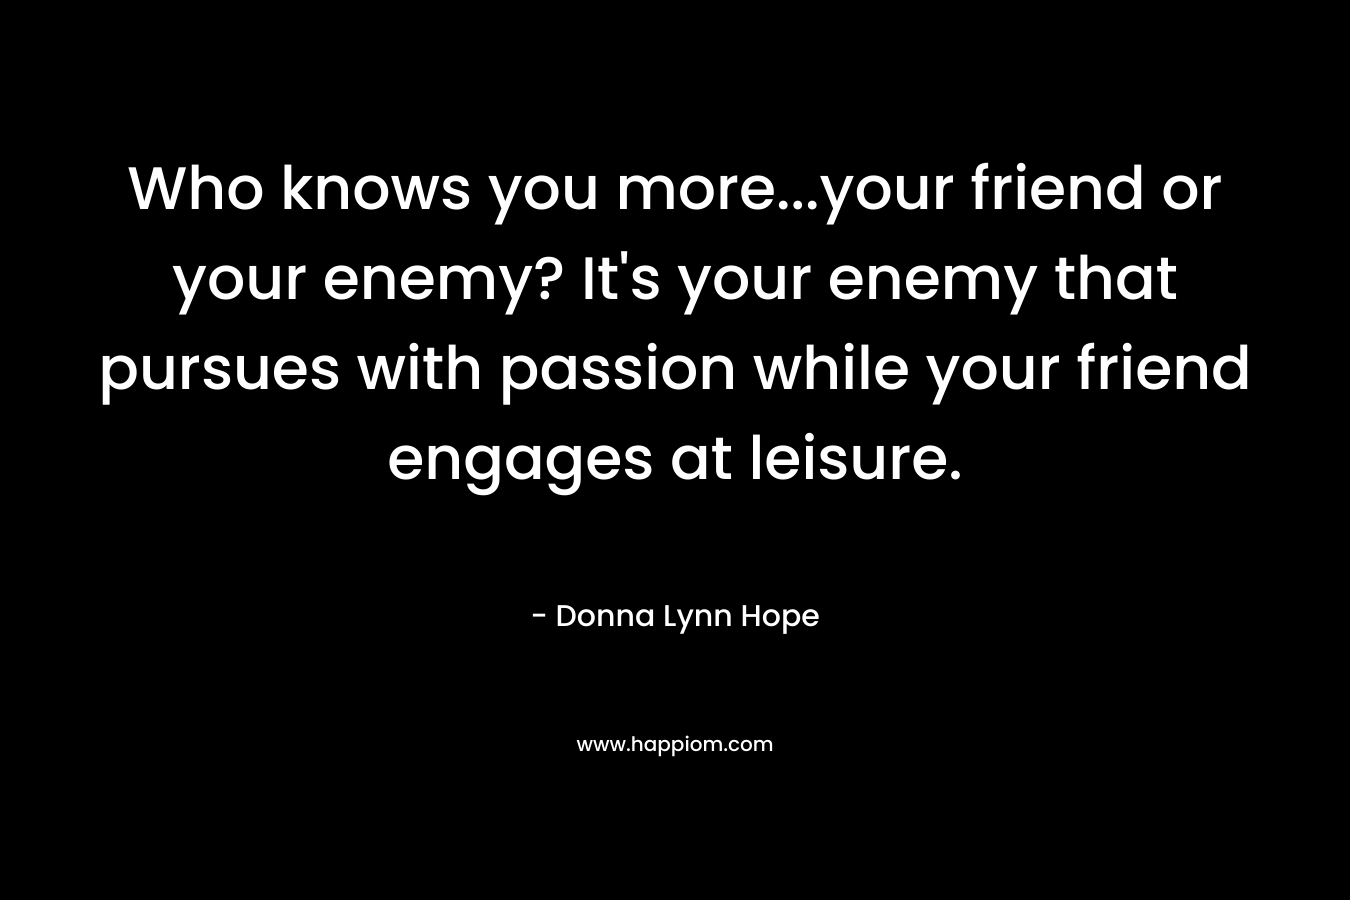 Who knows you more...your friend or your enemy? It's your enemy that pursues with passion while your friend engages at leisure.